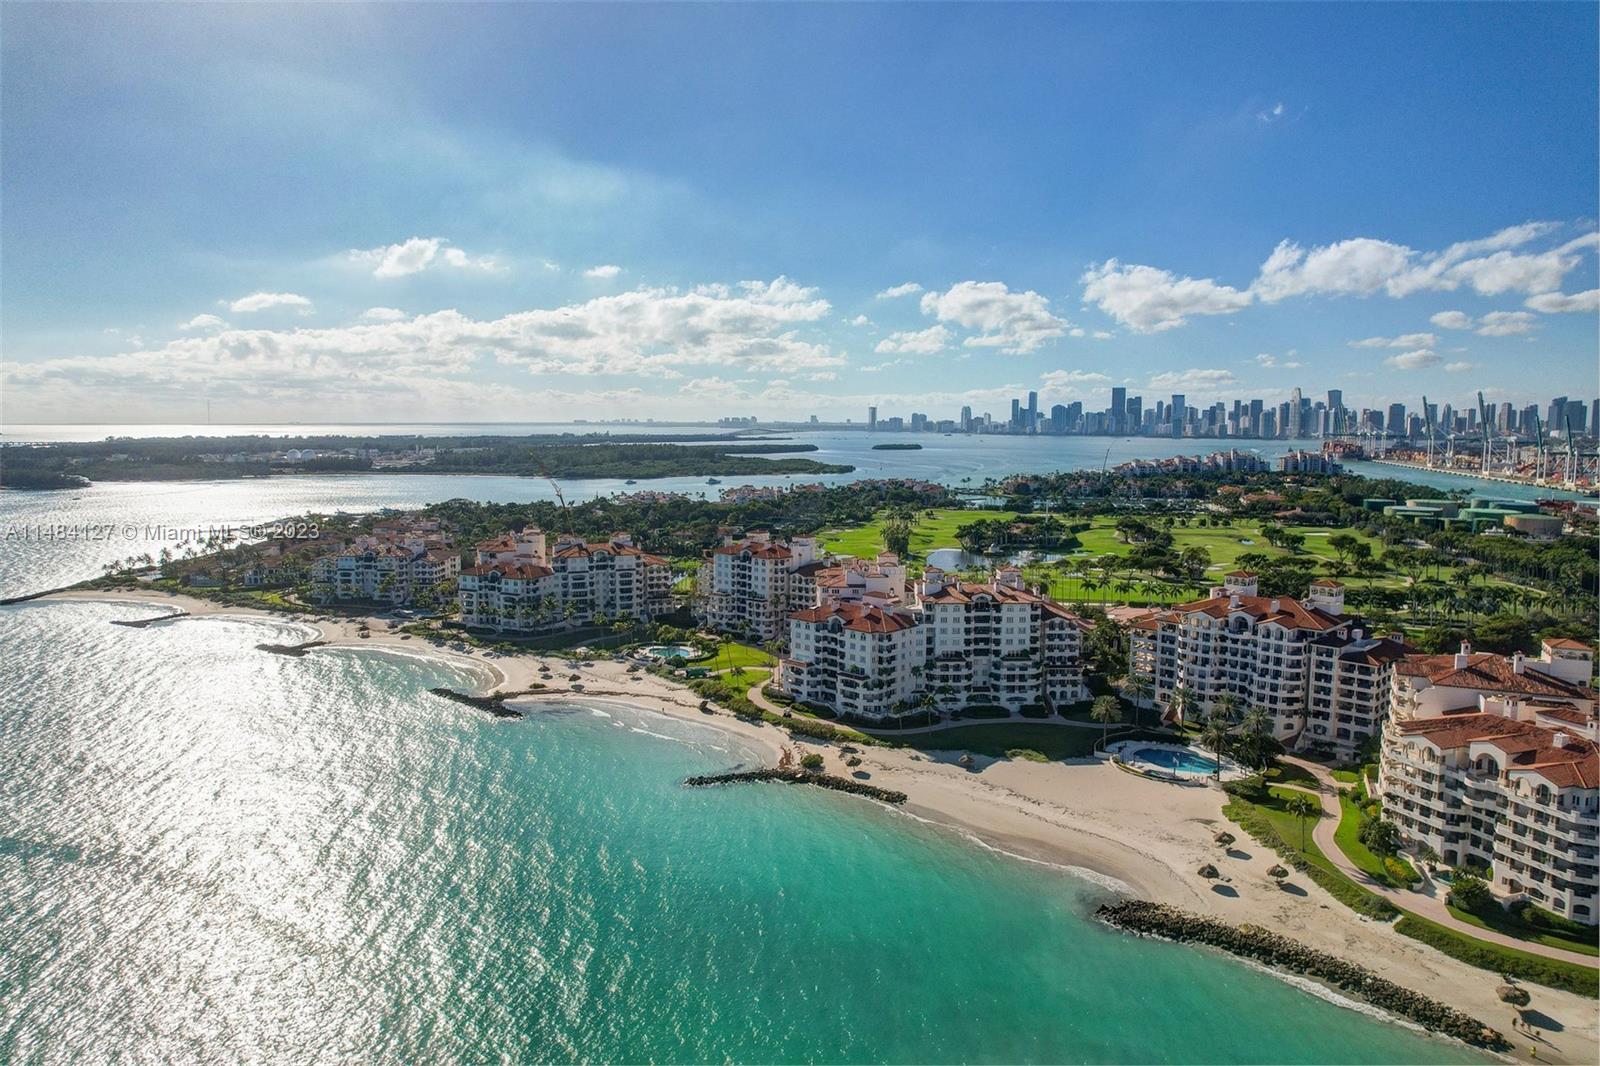 Rare center stack unit w/ direct ocean views of Fisher Island's exclusive private beach. For the beach lovers, this great 3BR, 3,122sf unit is located just steps from Fisher’s private soft Bahamian sand beach.  This residence features a large primary master suite w/ captivating ocean vista, a private terrace & his/her walk-in closets. Two over-sized BDR’s w/ their own terrace overlooking the Miami skyline frm this high fifth flr condo. The expansive open living room faces the azure Atlantic Ocean.  Super spacious kitchen can be renovated to create an open flr plan w/ panoramic ocean view. Impact glass sliding doors, elegant marble flrs throughout LIV. areas add a touch of luxury to your coastal retreat. Unwind on the expansive oversized terrace w/ awe-inspiring, uninterrupted ocean views.